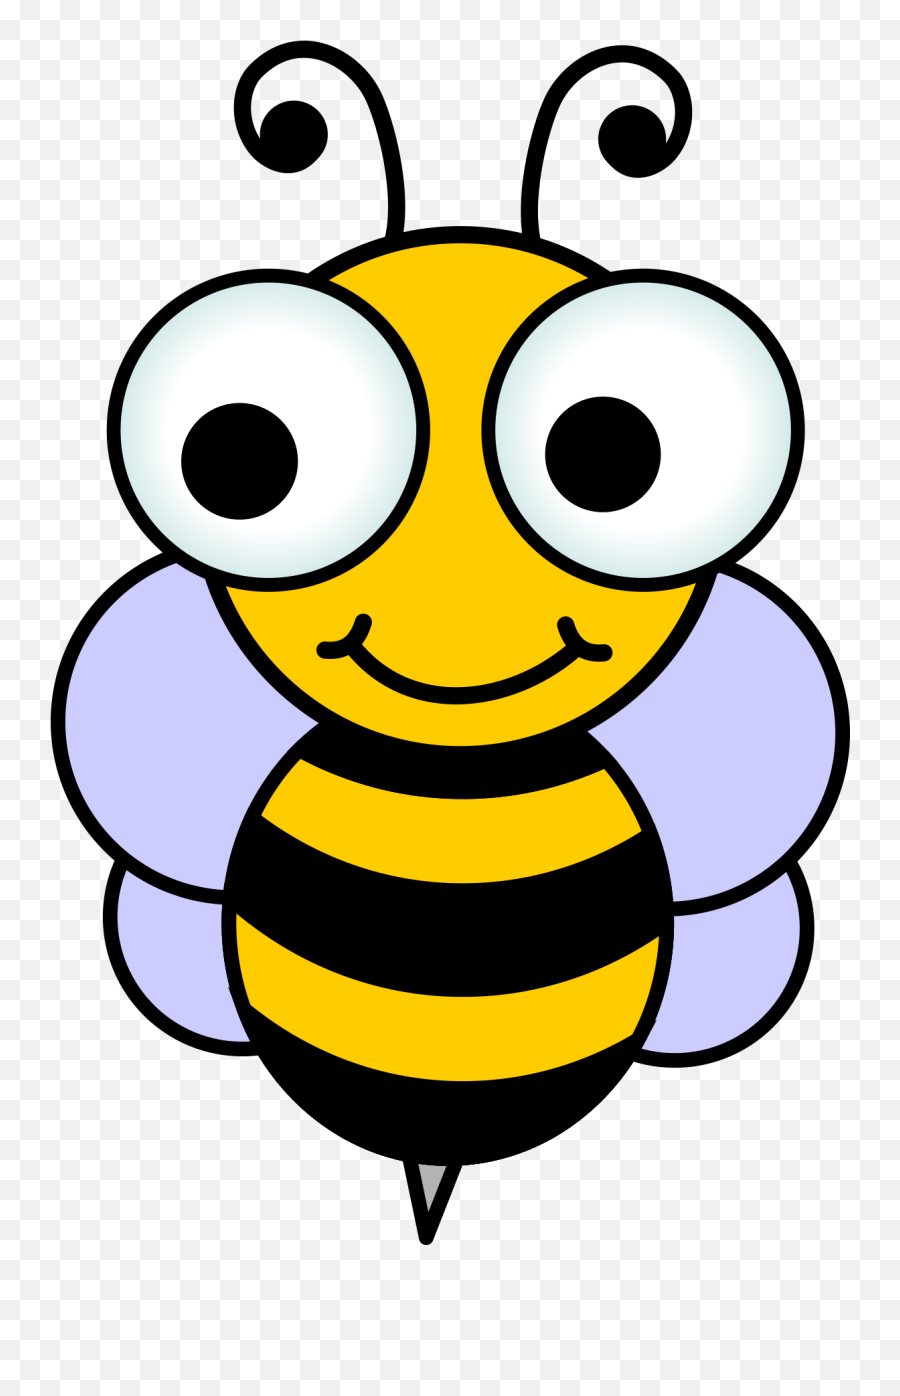 We Are Going To Learn So Many New Things This Year - Happy Emoji,Honeybee Emoji